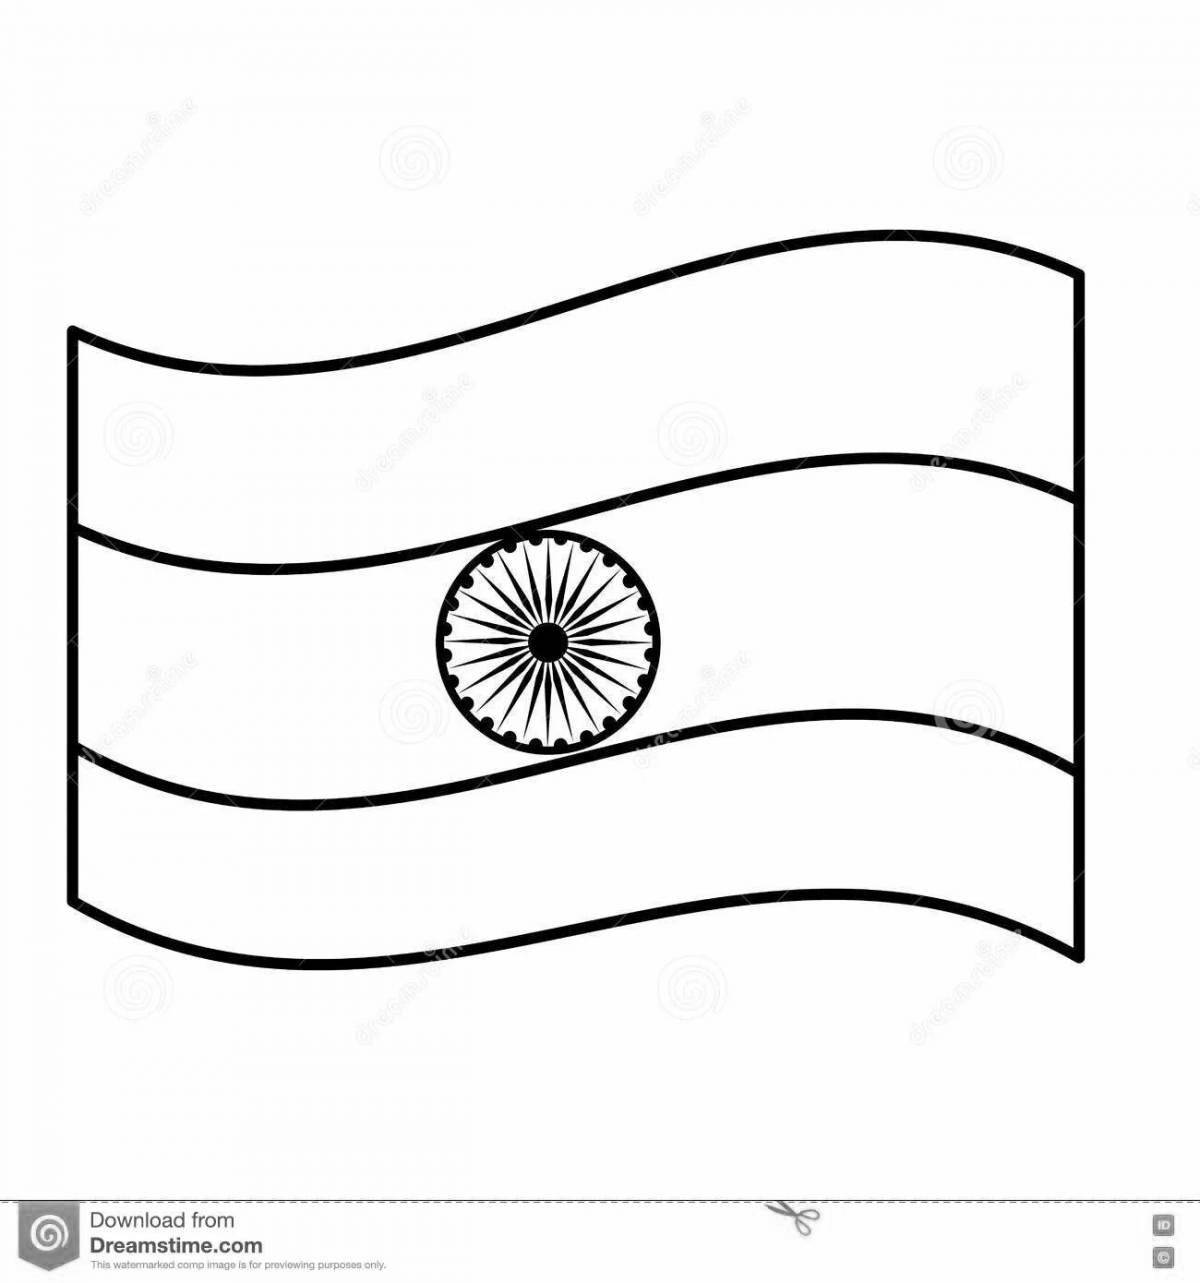 Glorious mongolia flag coloring page